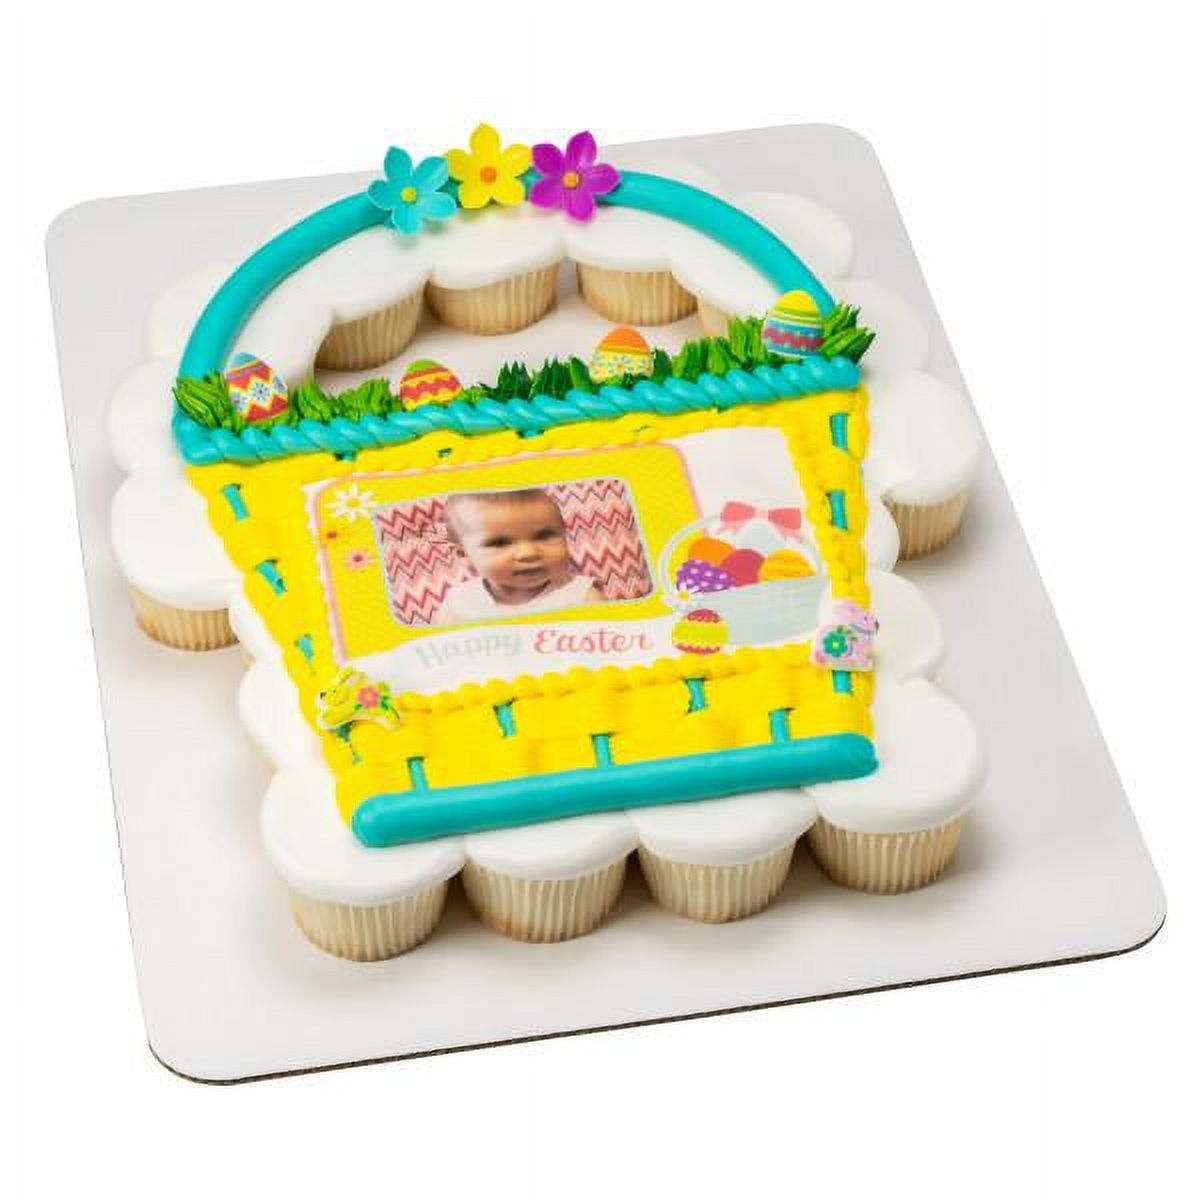 1/4 Sheet Animal Crossing Personalized Image Edible Frosting Cake Topper ABPID01079 - image 3 of 4